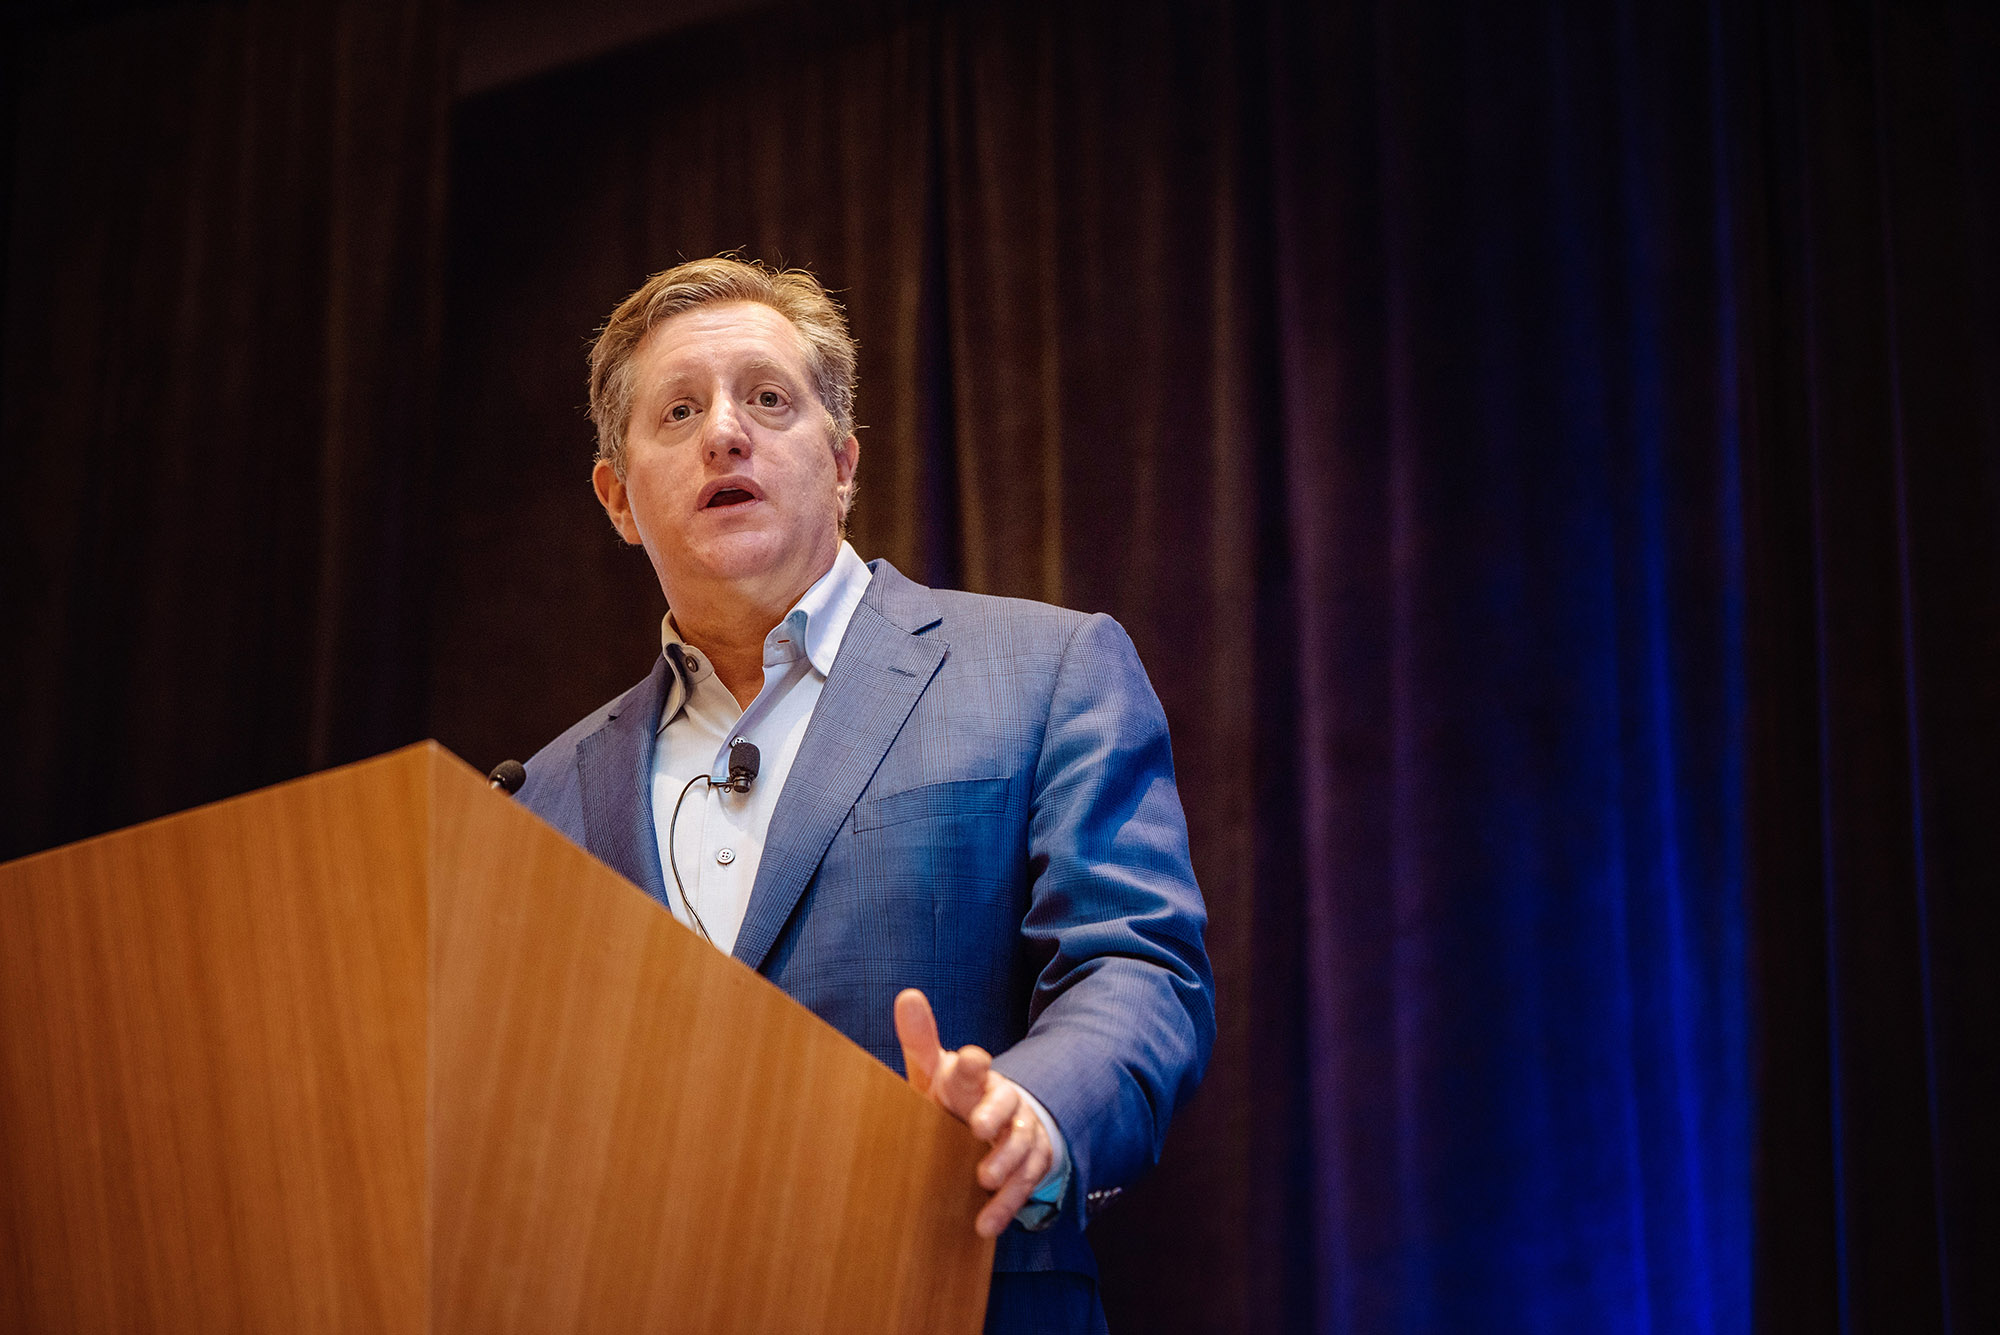 Event photography at the Eden Roc in Miami with guest speaker; Steve Eisman - 'big short' investor who bet on the crash.